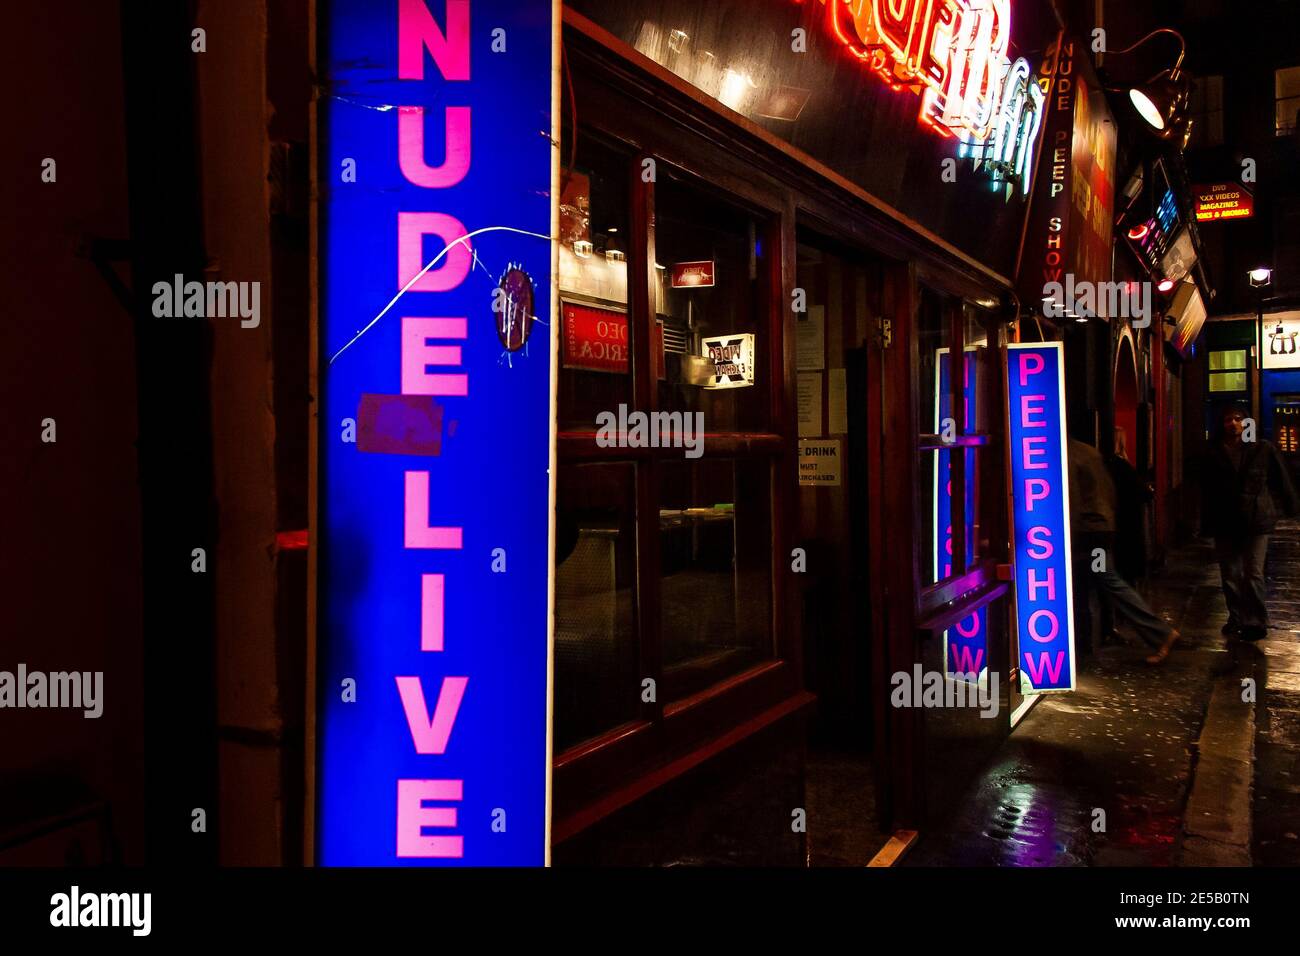 Red light district in Soho London at night with illuminated signage advertising nude live show and peep show Stock Photo